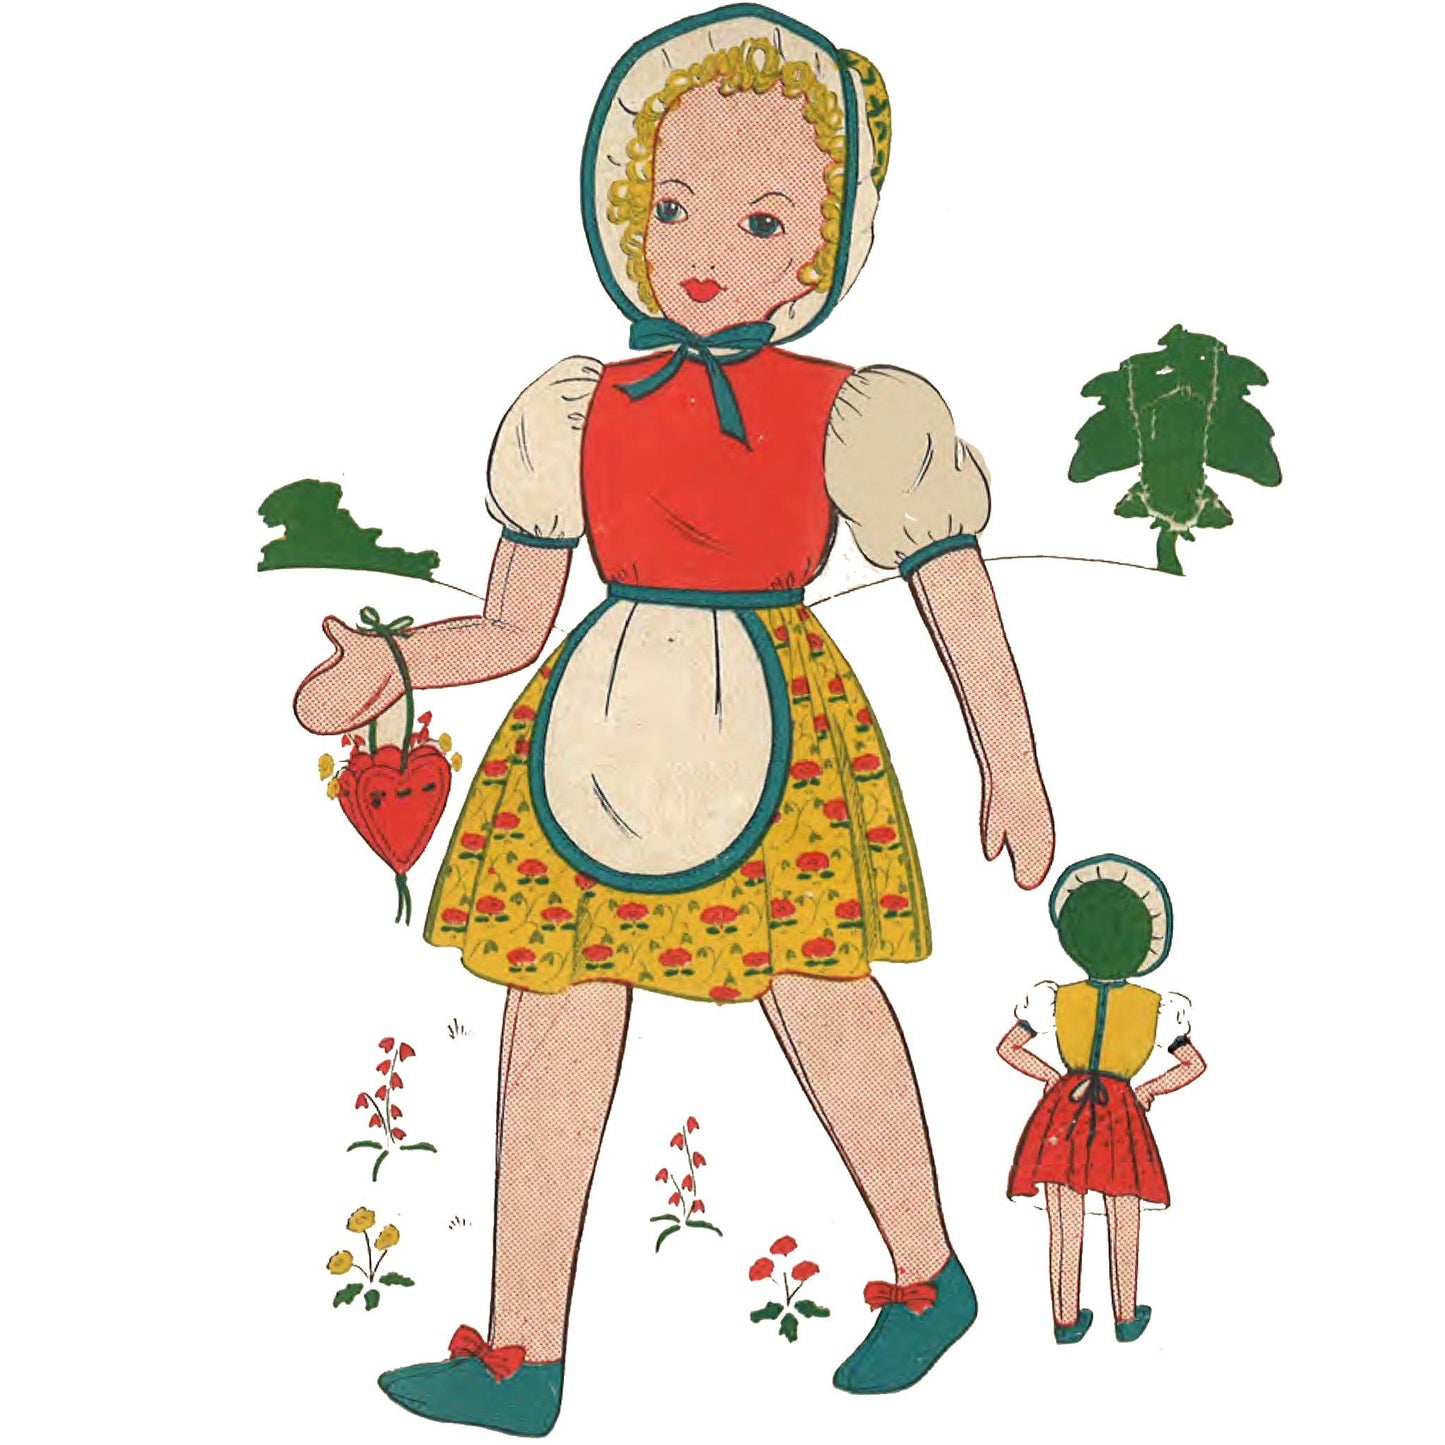 Child's rag doll wearing dress with red bodice, white sleeves and a yellow patterned skirt. Smaller inset image of back view of doll.